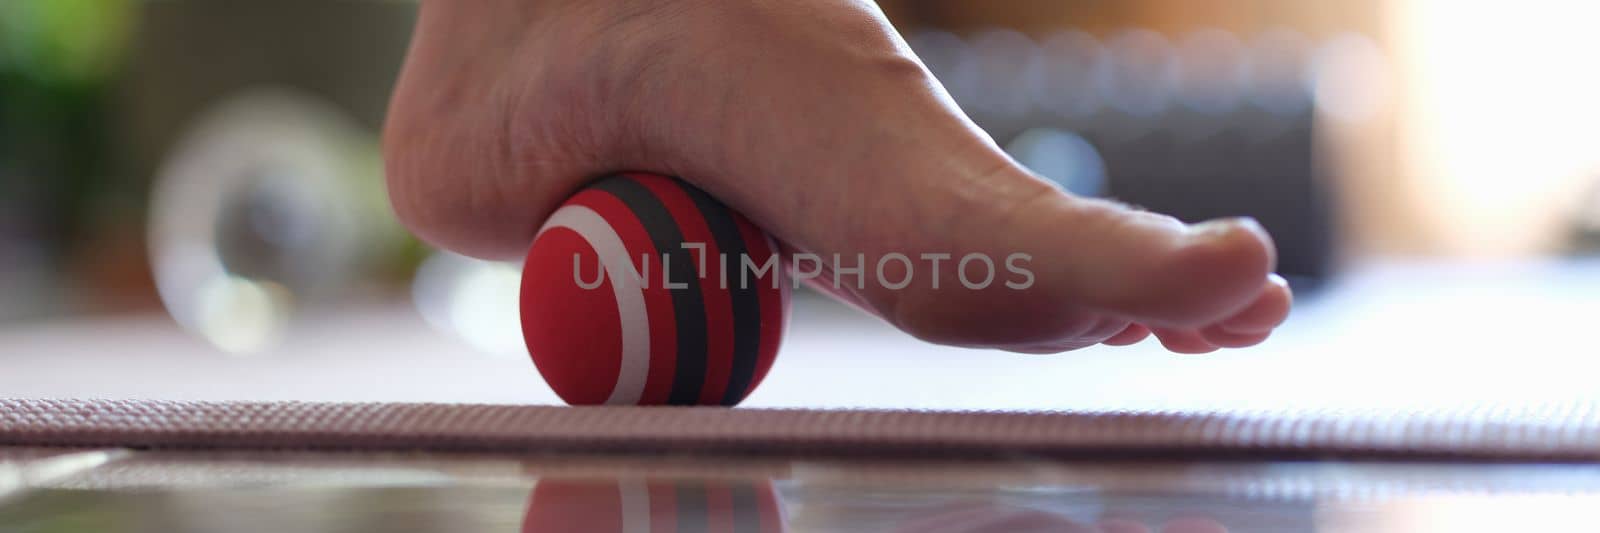 Massage ball applies pressure to painful area on foot by kuprevich